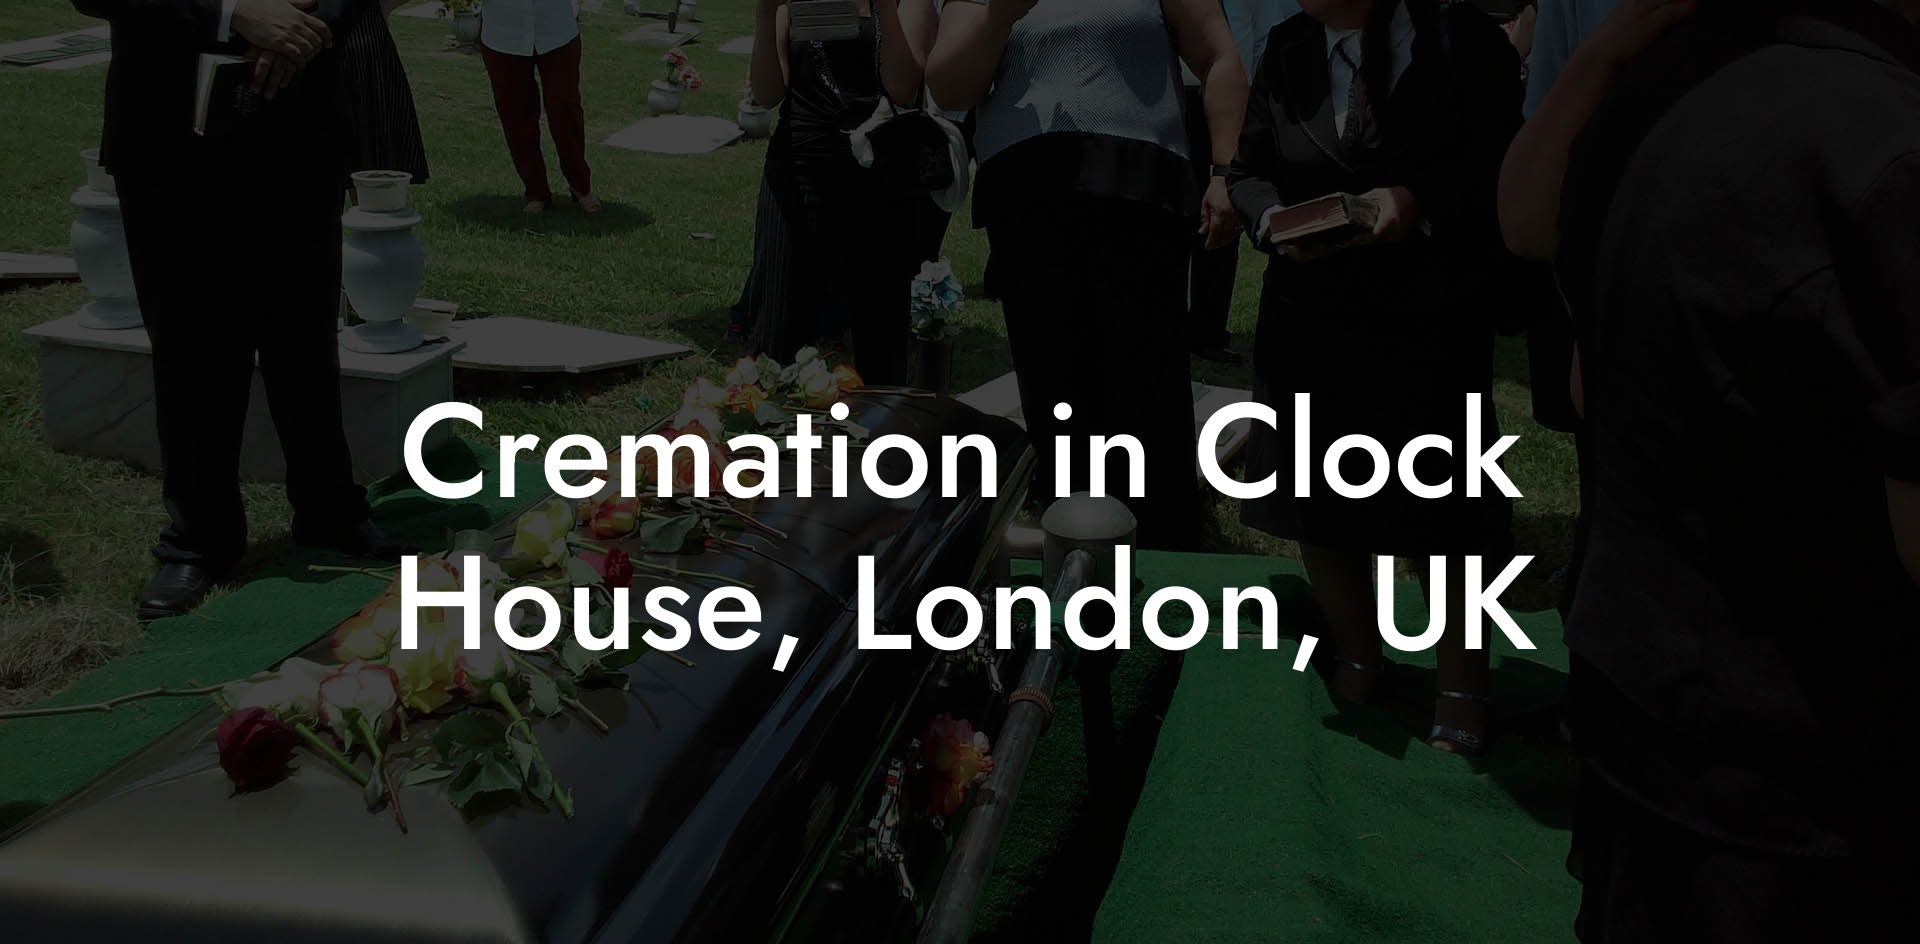 Cremation in Clock House, London, UK